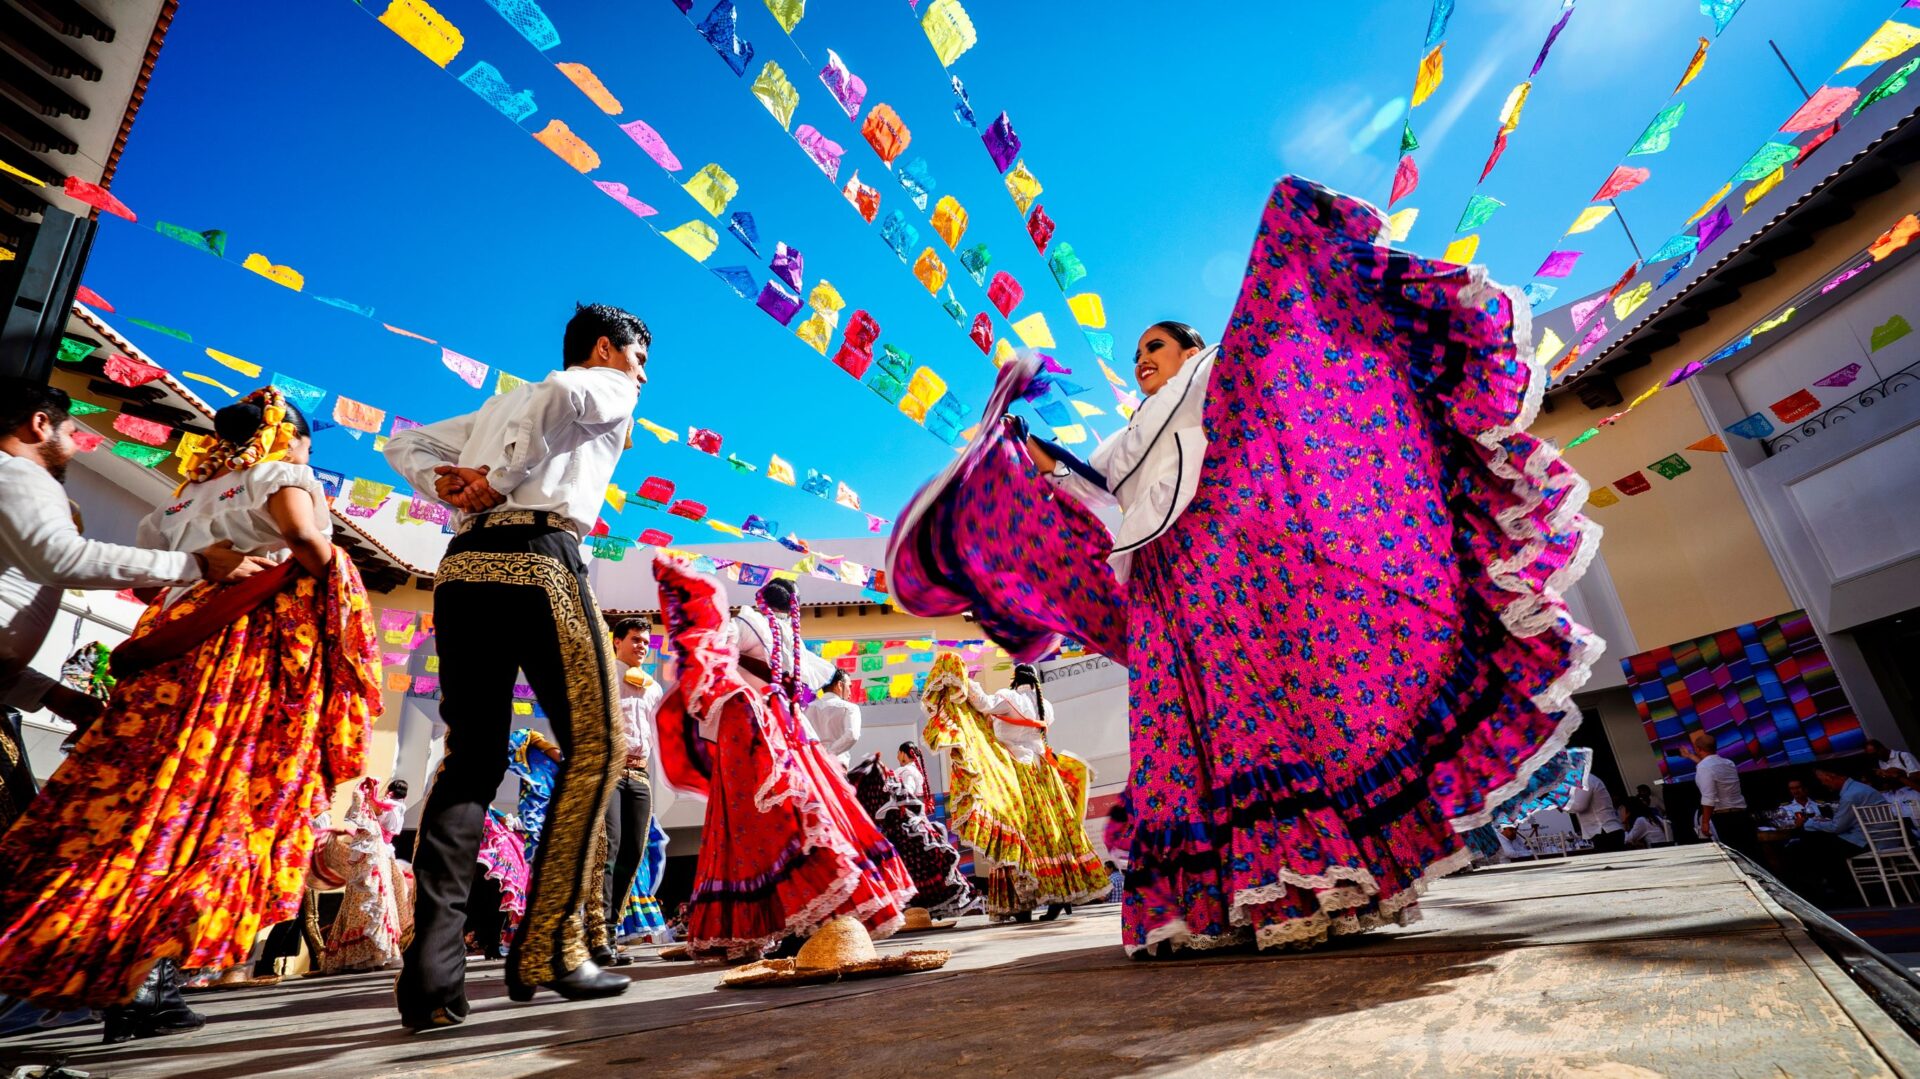 Mexican Culture  Facts About Mexico